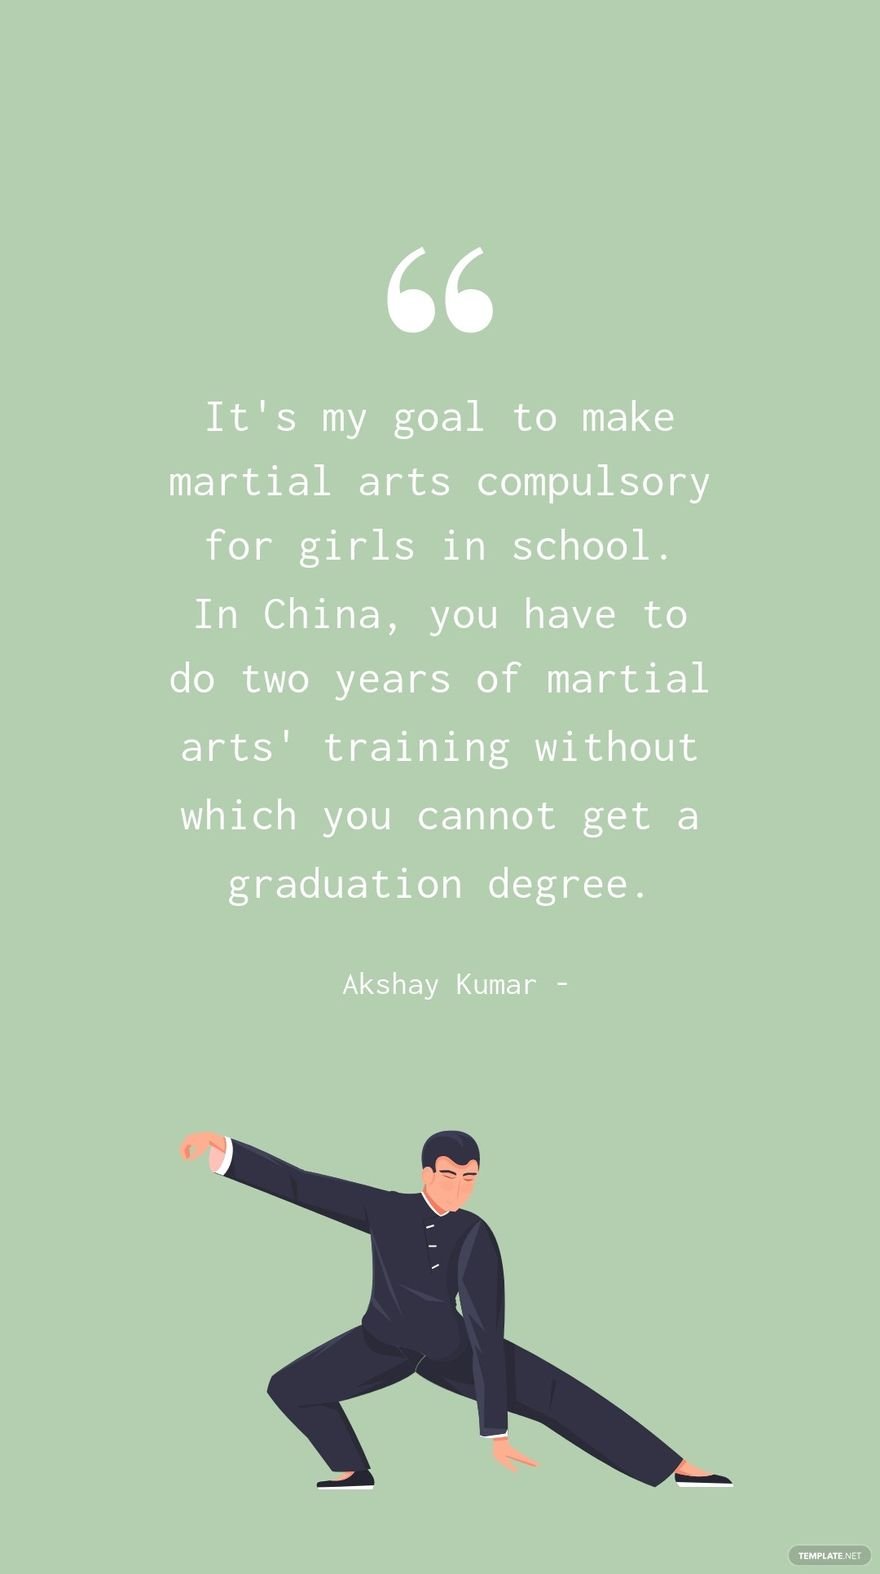 Akshay Kumar - It's my goal to make martial arts compulsory for girls in school. In China, you have to do two years of martial arts' training without which you cannot get a graduation degree.